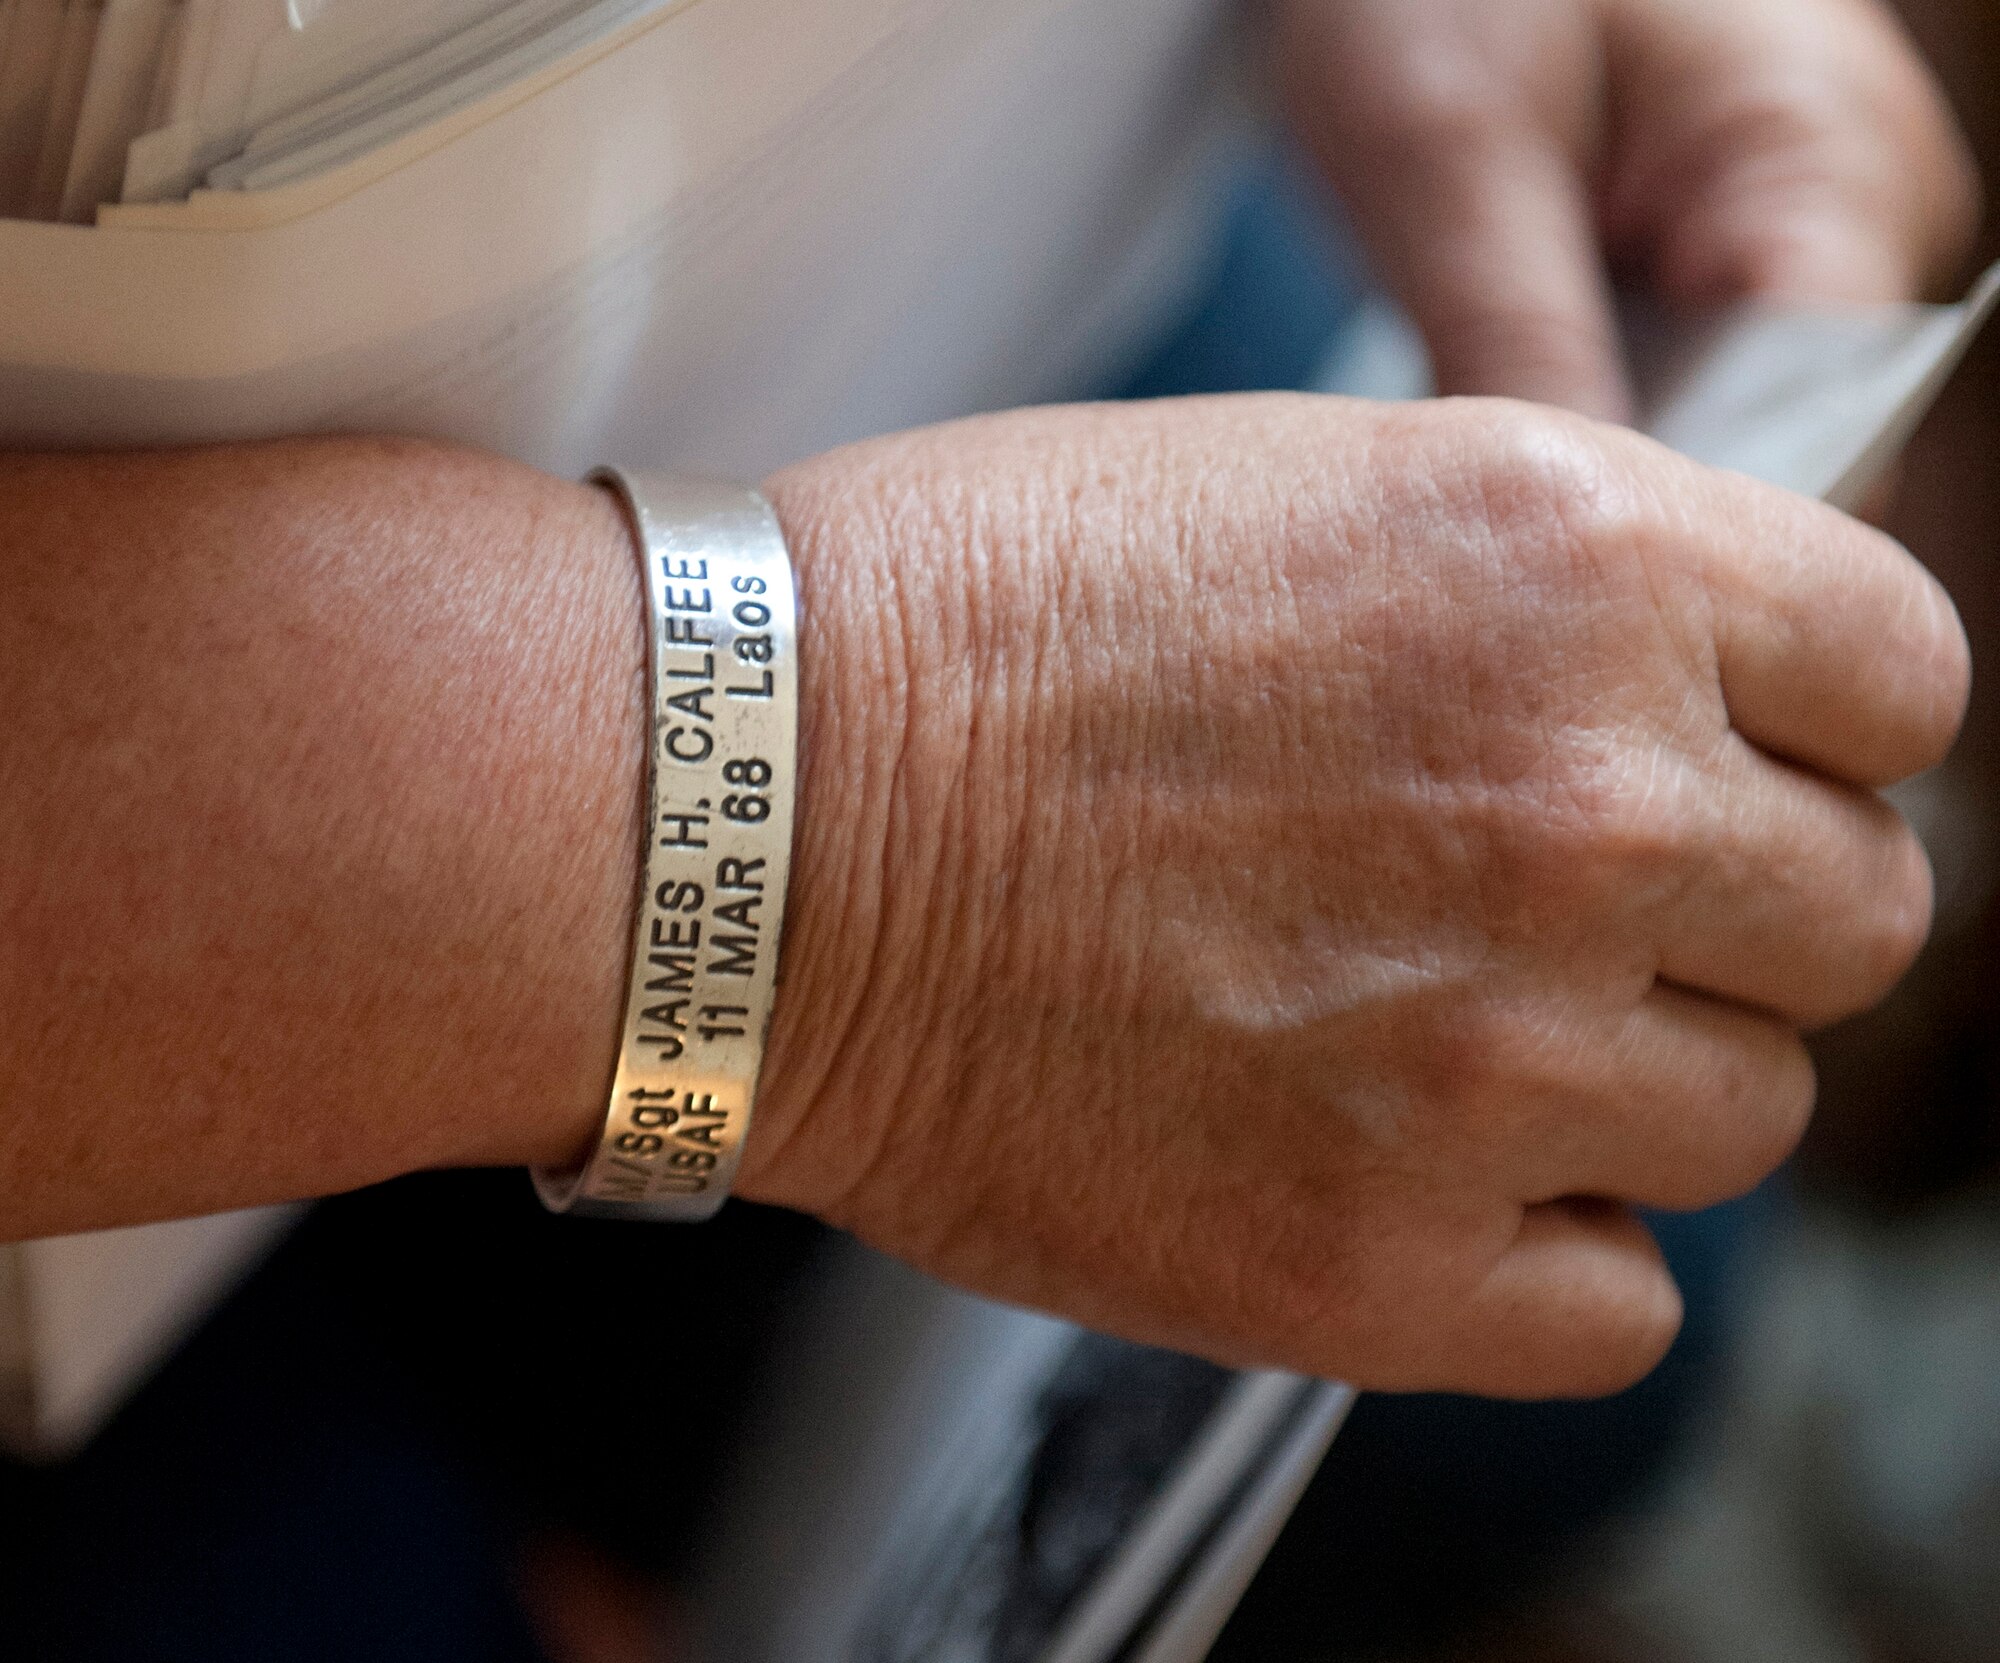 Debra Morris, a niece of U.S. Air Force Master Sgt. James Calfee, wears a Vietnam War POW/MIA bracelet in honor of her late uncle in Houston, Texas, Aug. 22, 2012. Calfee was killed in action in Laos in 1968. (U.S. Air Force photo/Val Gempis)